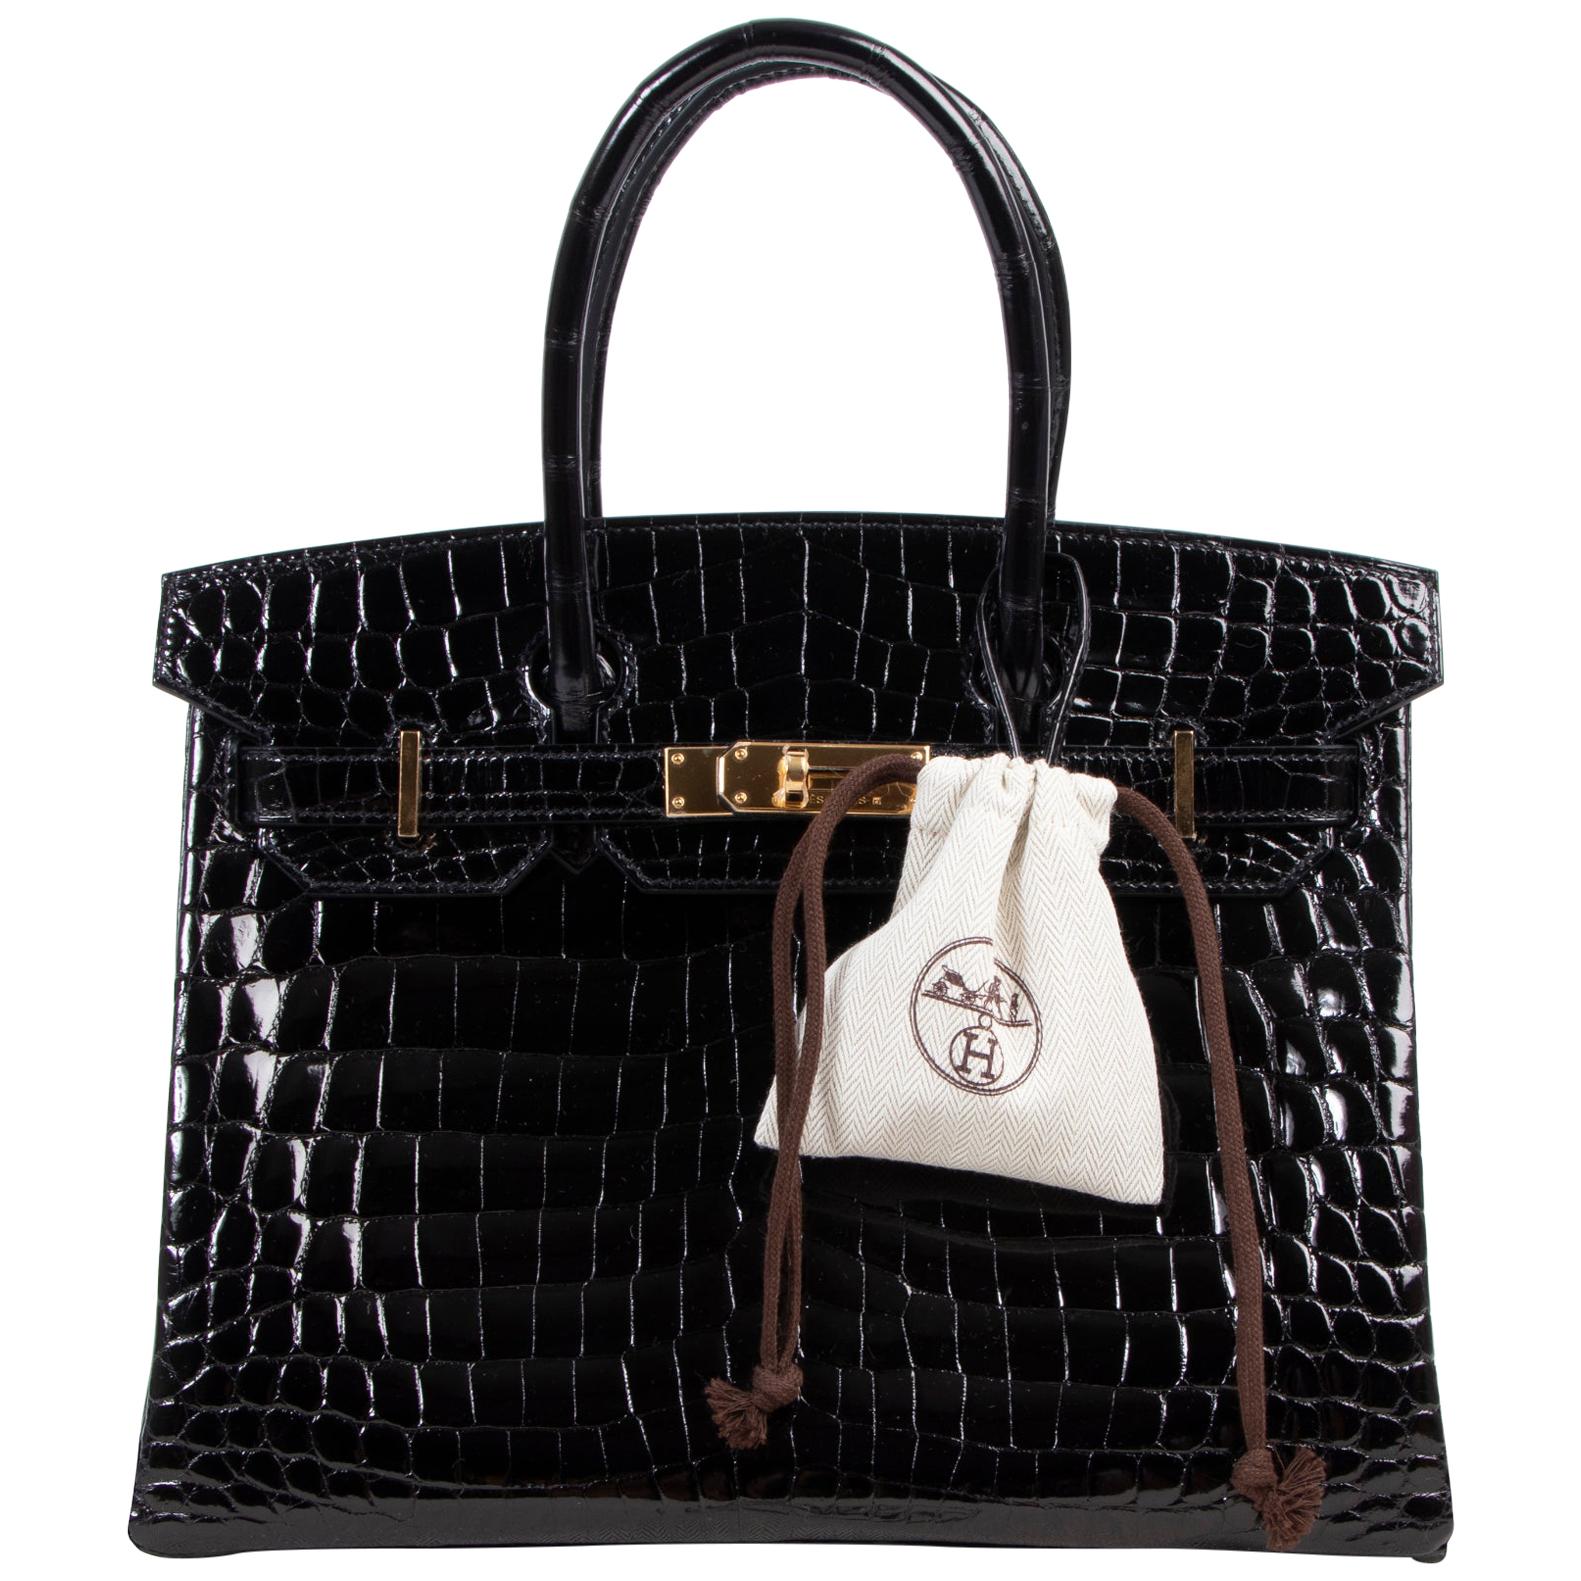 BRAND NEW

Hermès Birkin 30 Crocodile Niloticus Lisse Noir GHW

The real lover of luxury will feel his or her heart beat faster upon seeing this gorgeous Hermès Birkin 30 Crocodile Niloticus Lisse Noir GHW. The shiny black crocodile hide is exotic